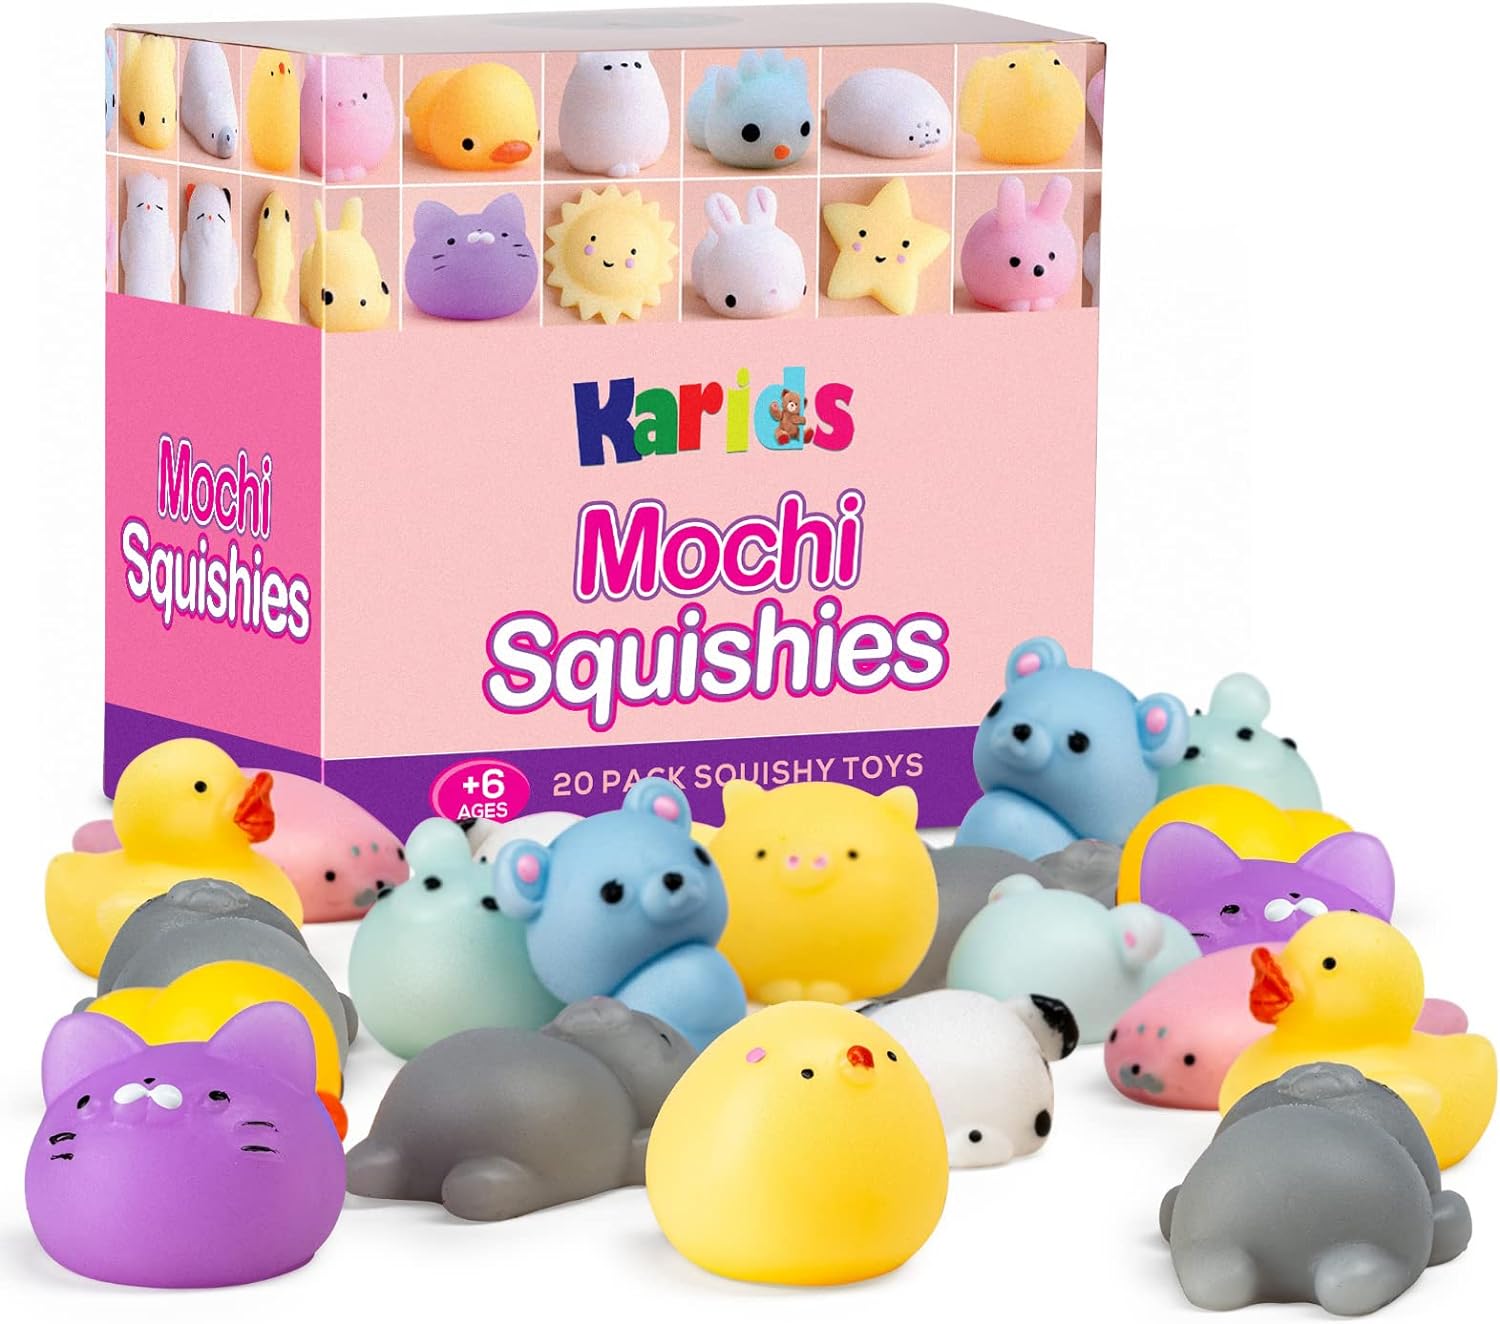 Mini Animal Squishy Pack - 20 Pieces Random Mochi Squishies Party Favor Toys for Kids - Soft Squeezable Stress Reliever Squeeze stocking fillers christmas for boys men women girls teenage gifts